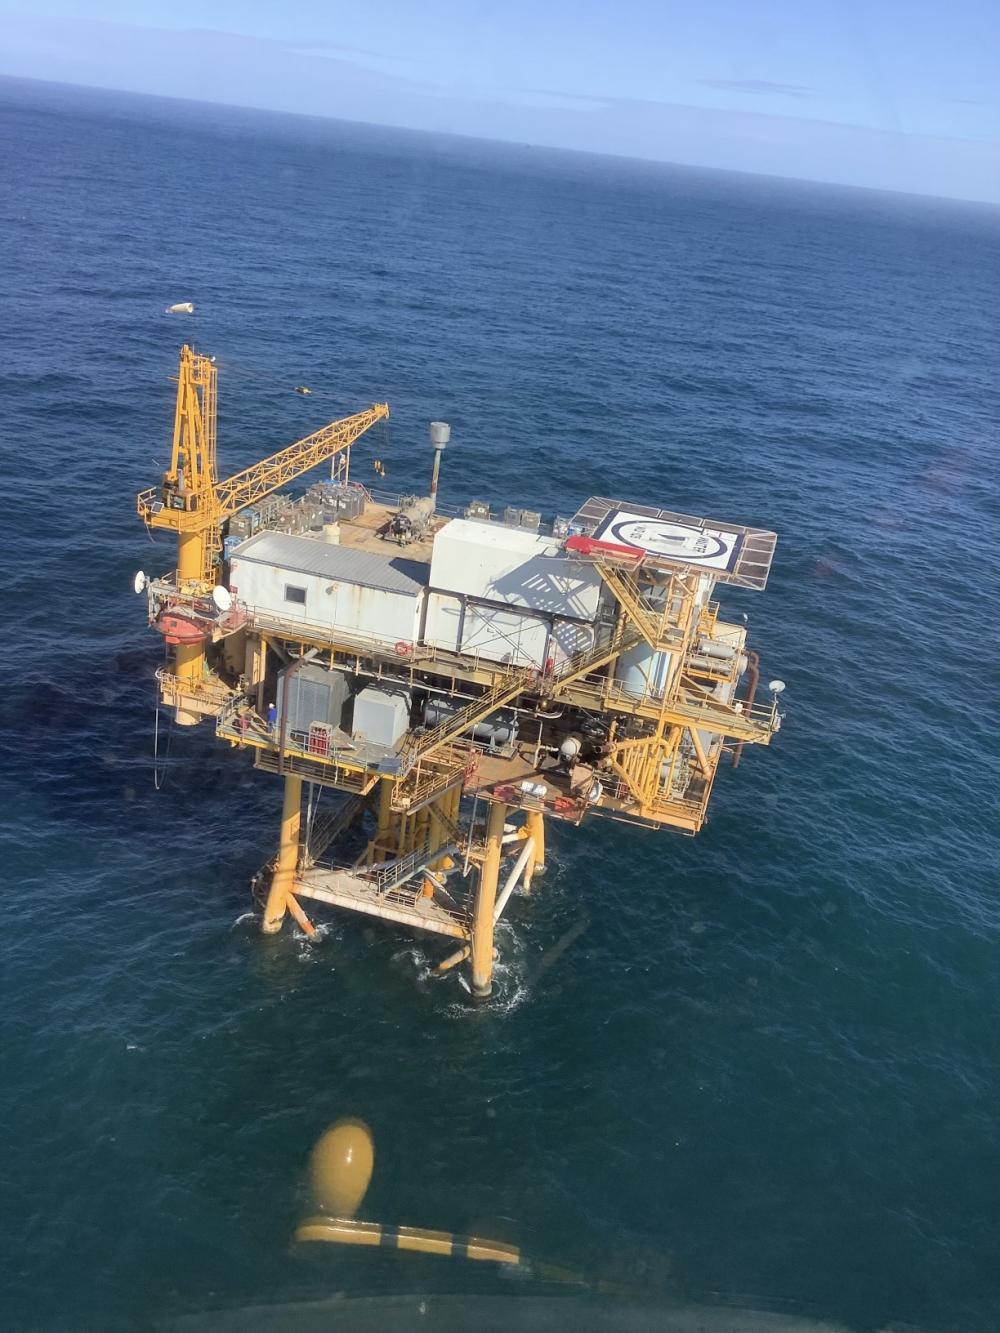 Search suspended for four missing in chopper incident in Gulf of Mexico